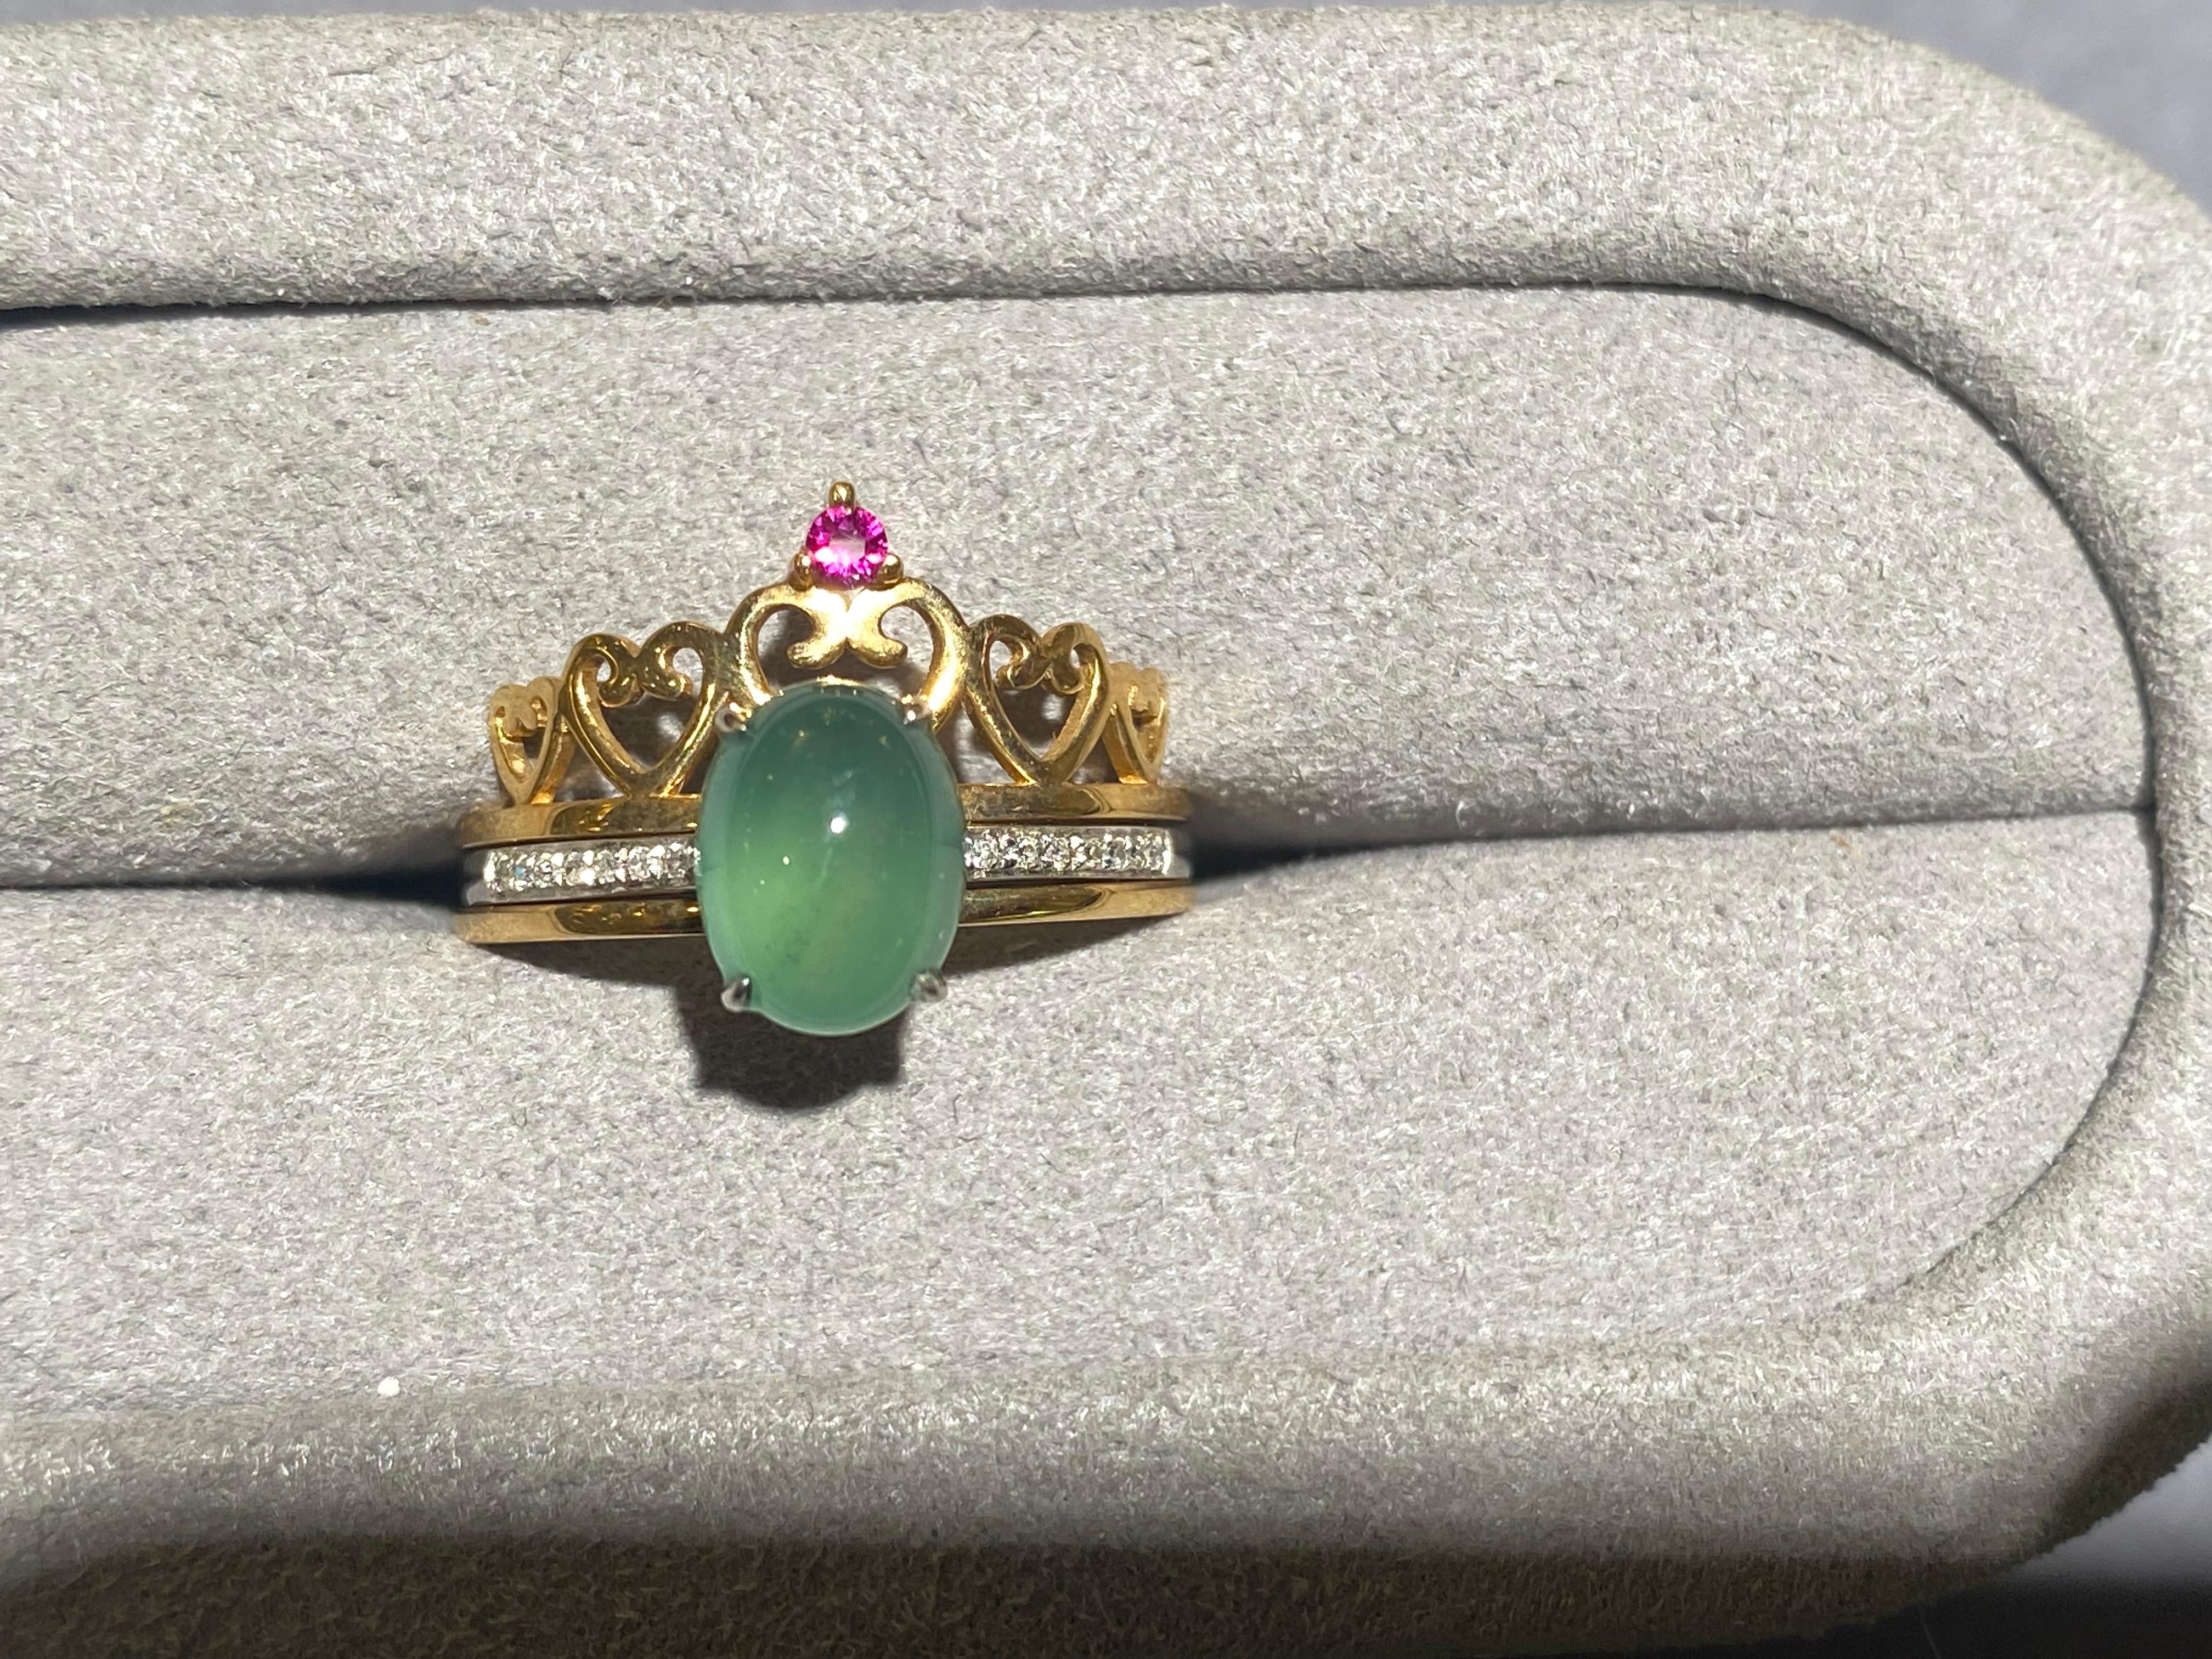 This is a type A green jadeite and diamond detachable ring in 18k yellow and white gold. The jadeite is set on the 18k white gold ring and approximately a quarter of the band of the ring is set with micro diamonds. The jadeite 18k white gold ring